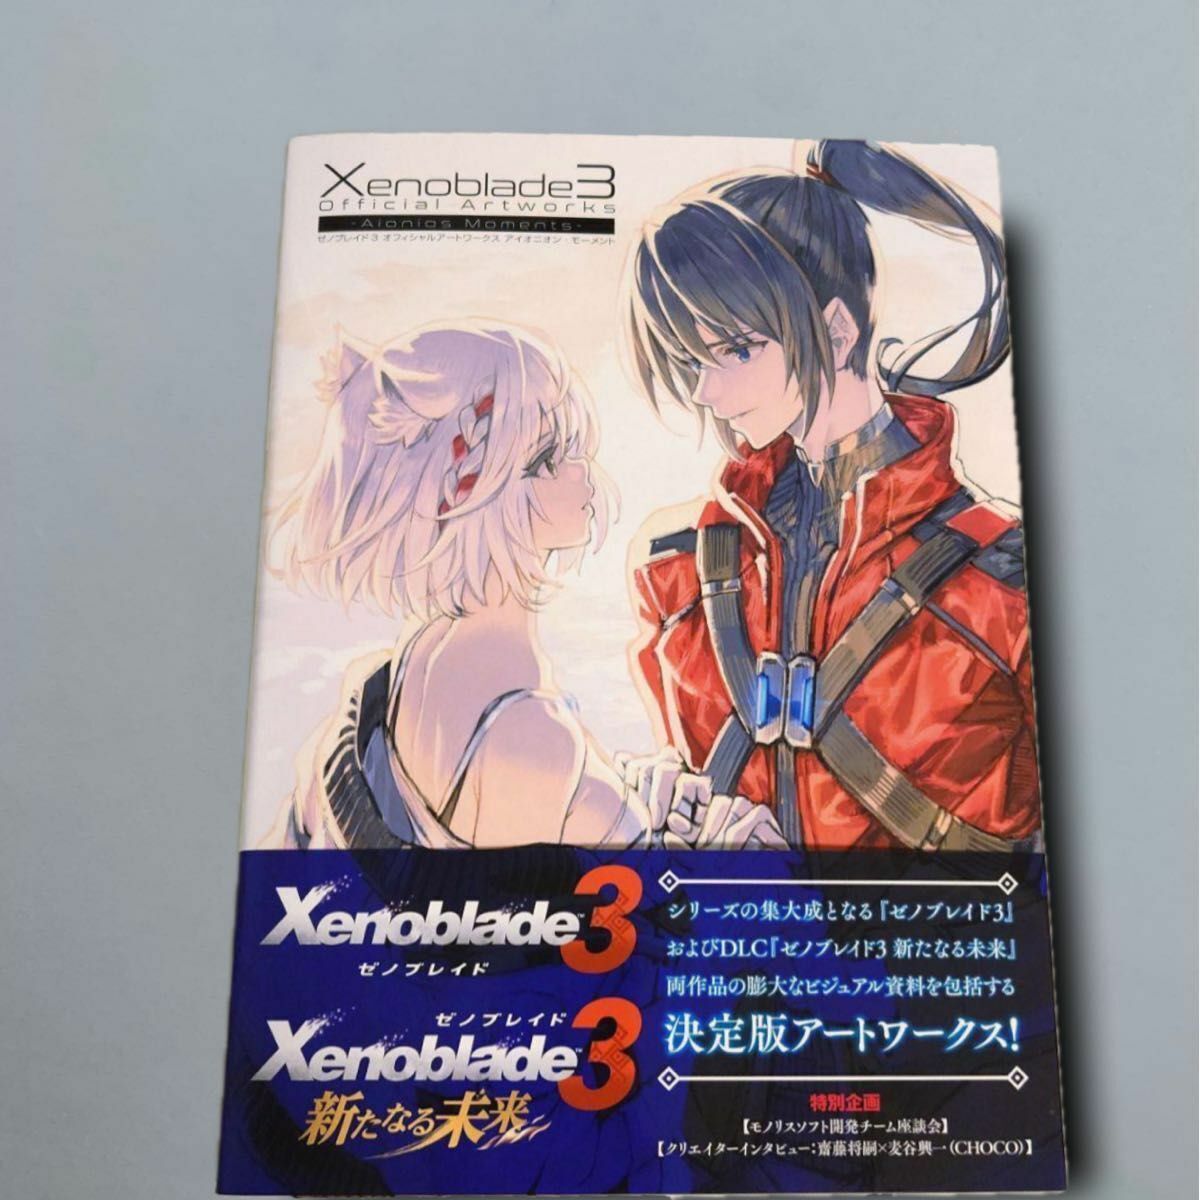 Xenoblade 3 OFFICIAL ART WORKS Aionions Moments Game Illustration BOOK